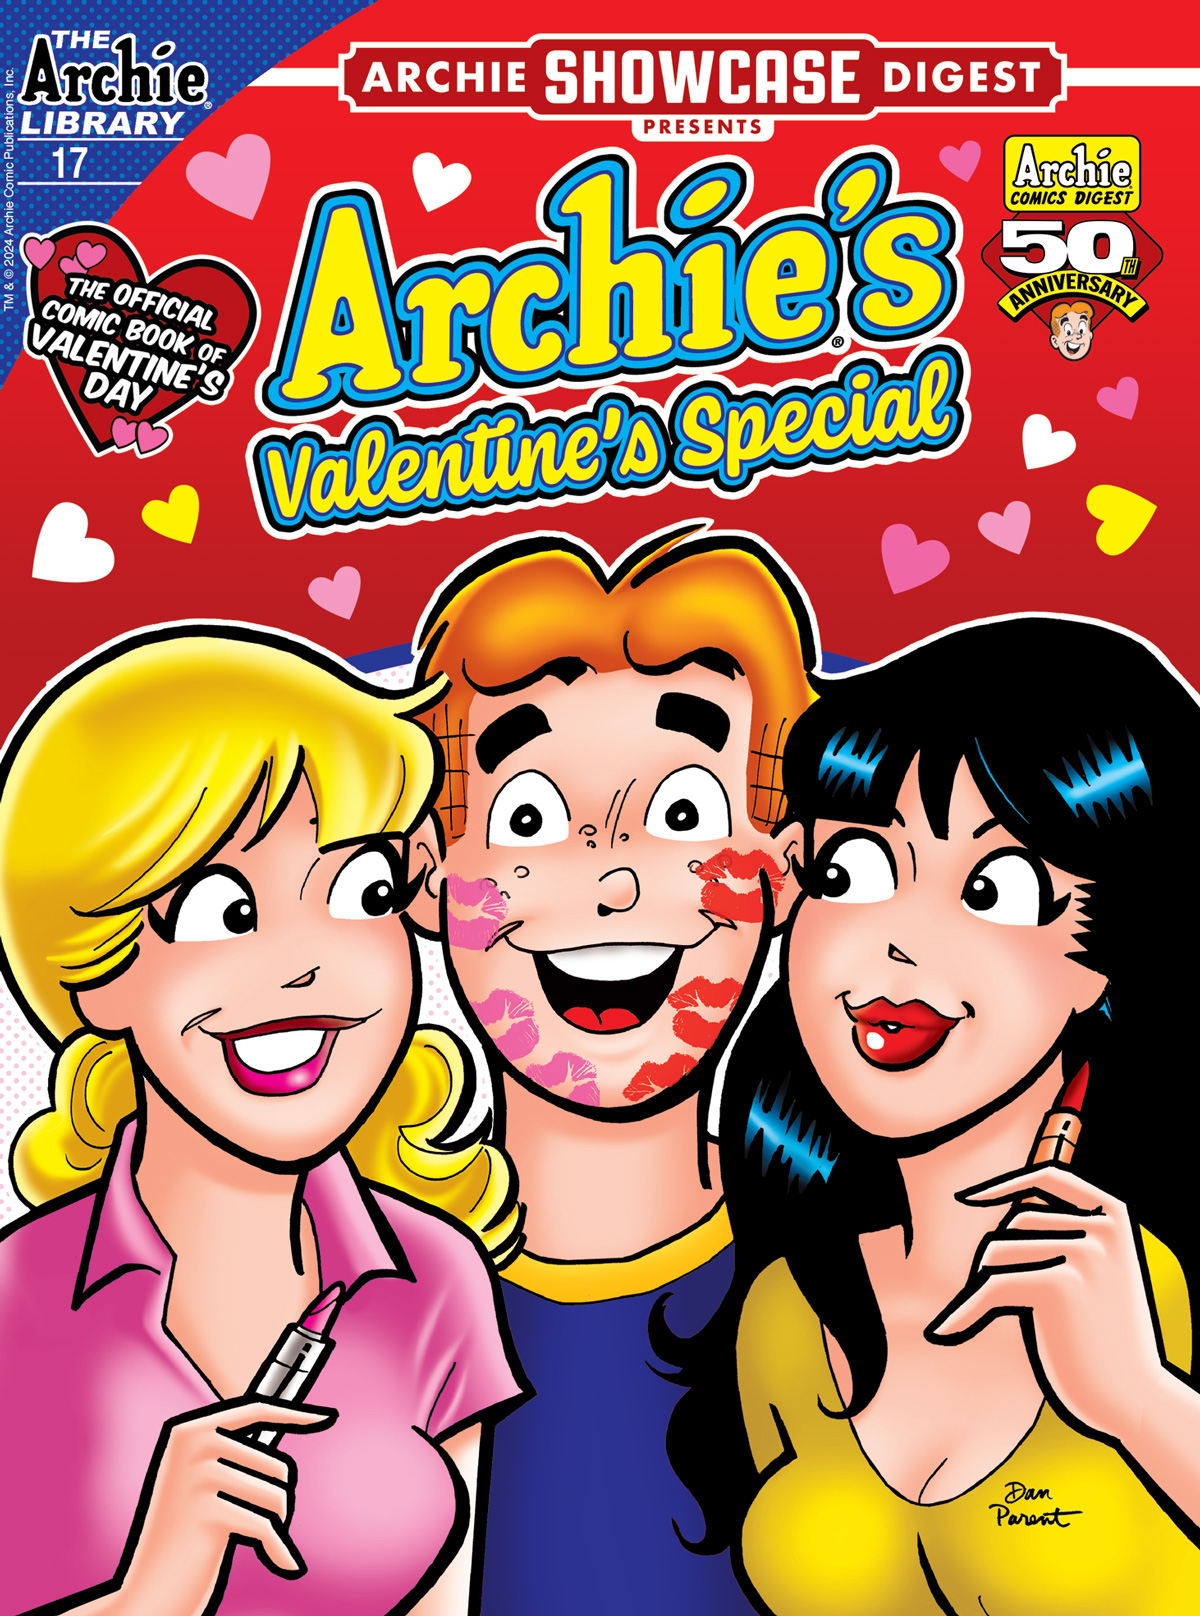 Betty and Veronica stand on either side of Archie, who has lipstick marks all over both cheeks.